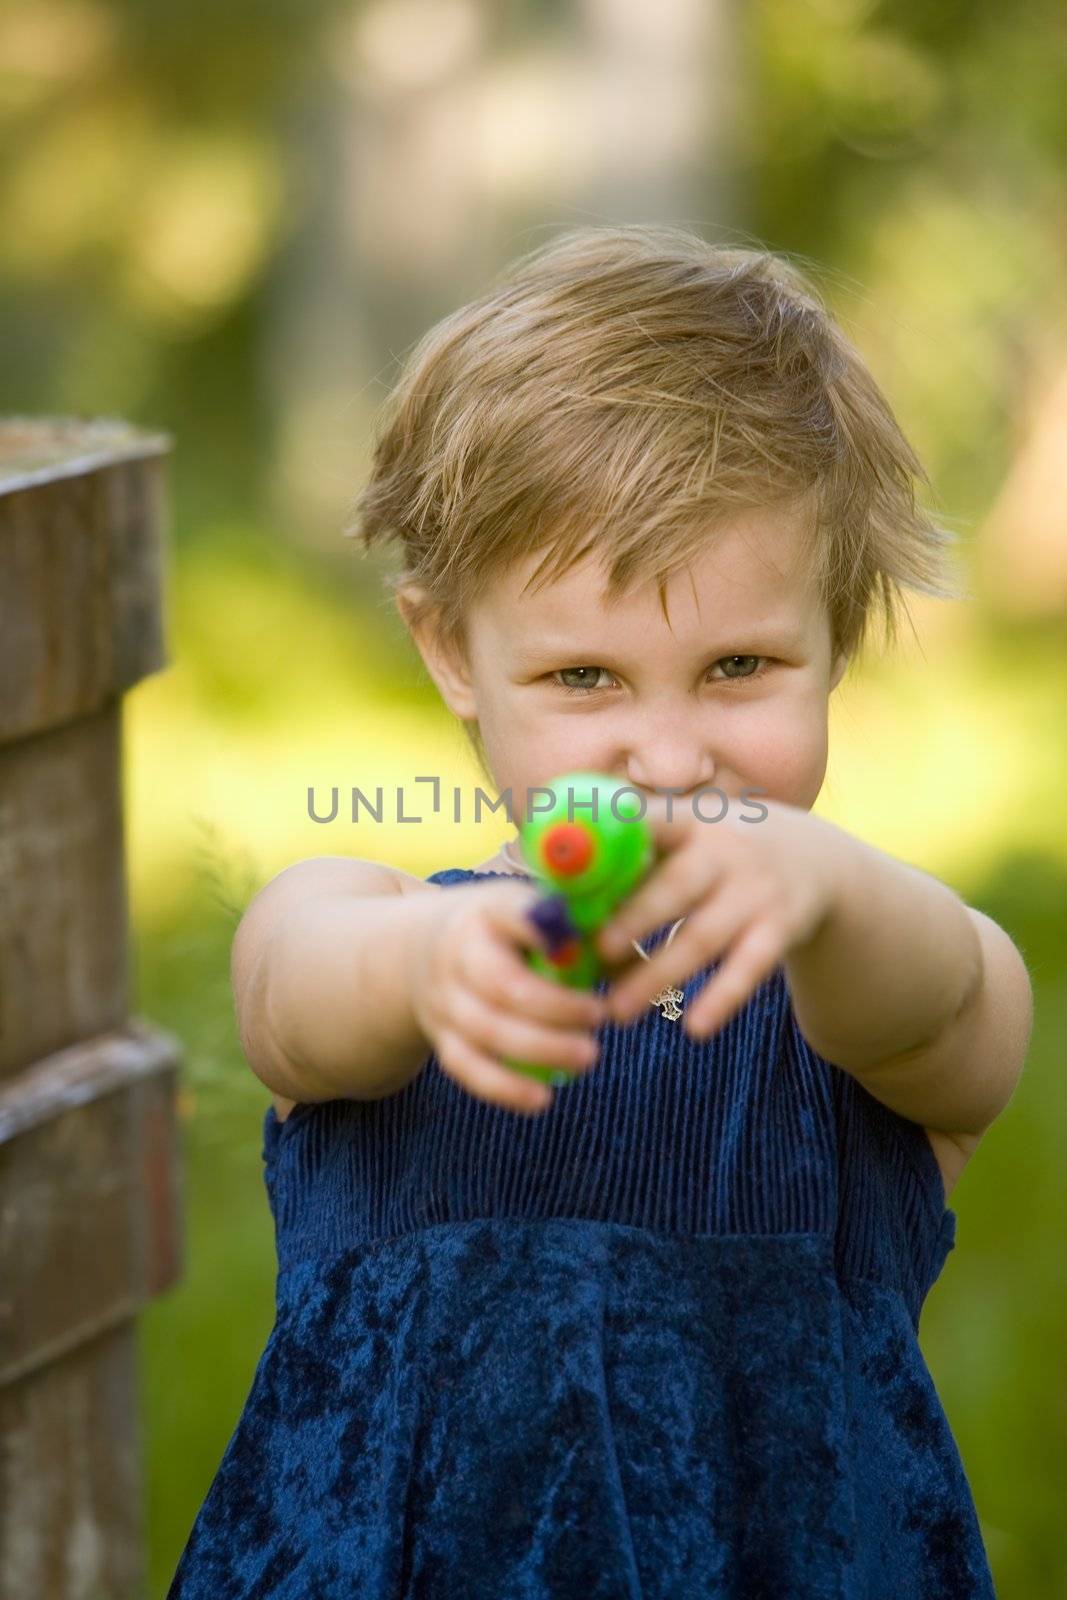 The little girl in a dark blue dress is going to shoot from a water pistol in summer day
